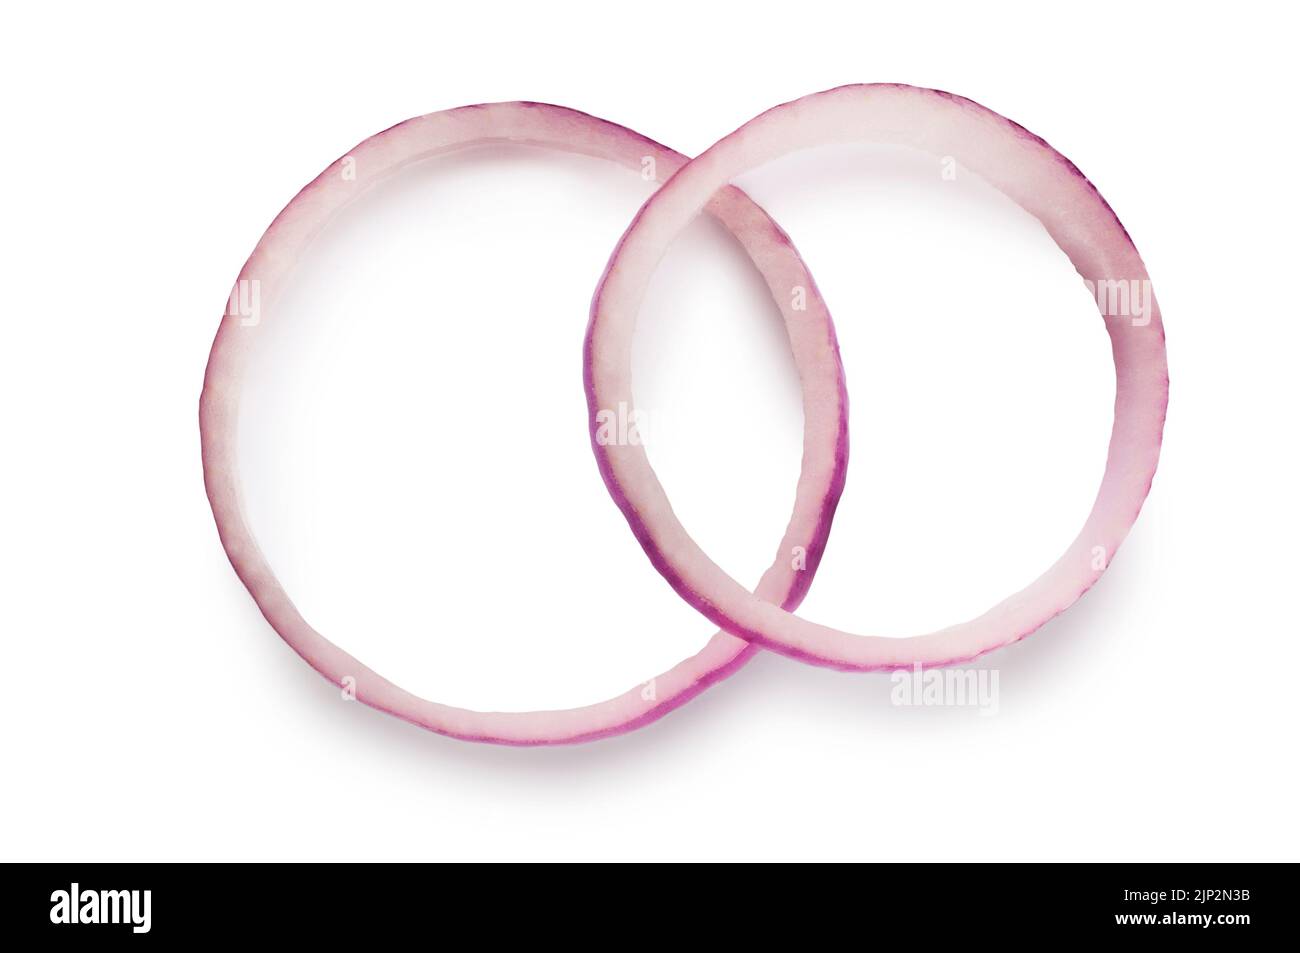 Studio shot of sliced red onions rings cut out against a white background - John Gollop Stock Photo